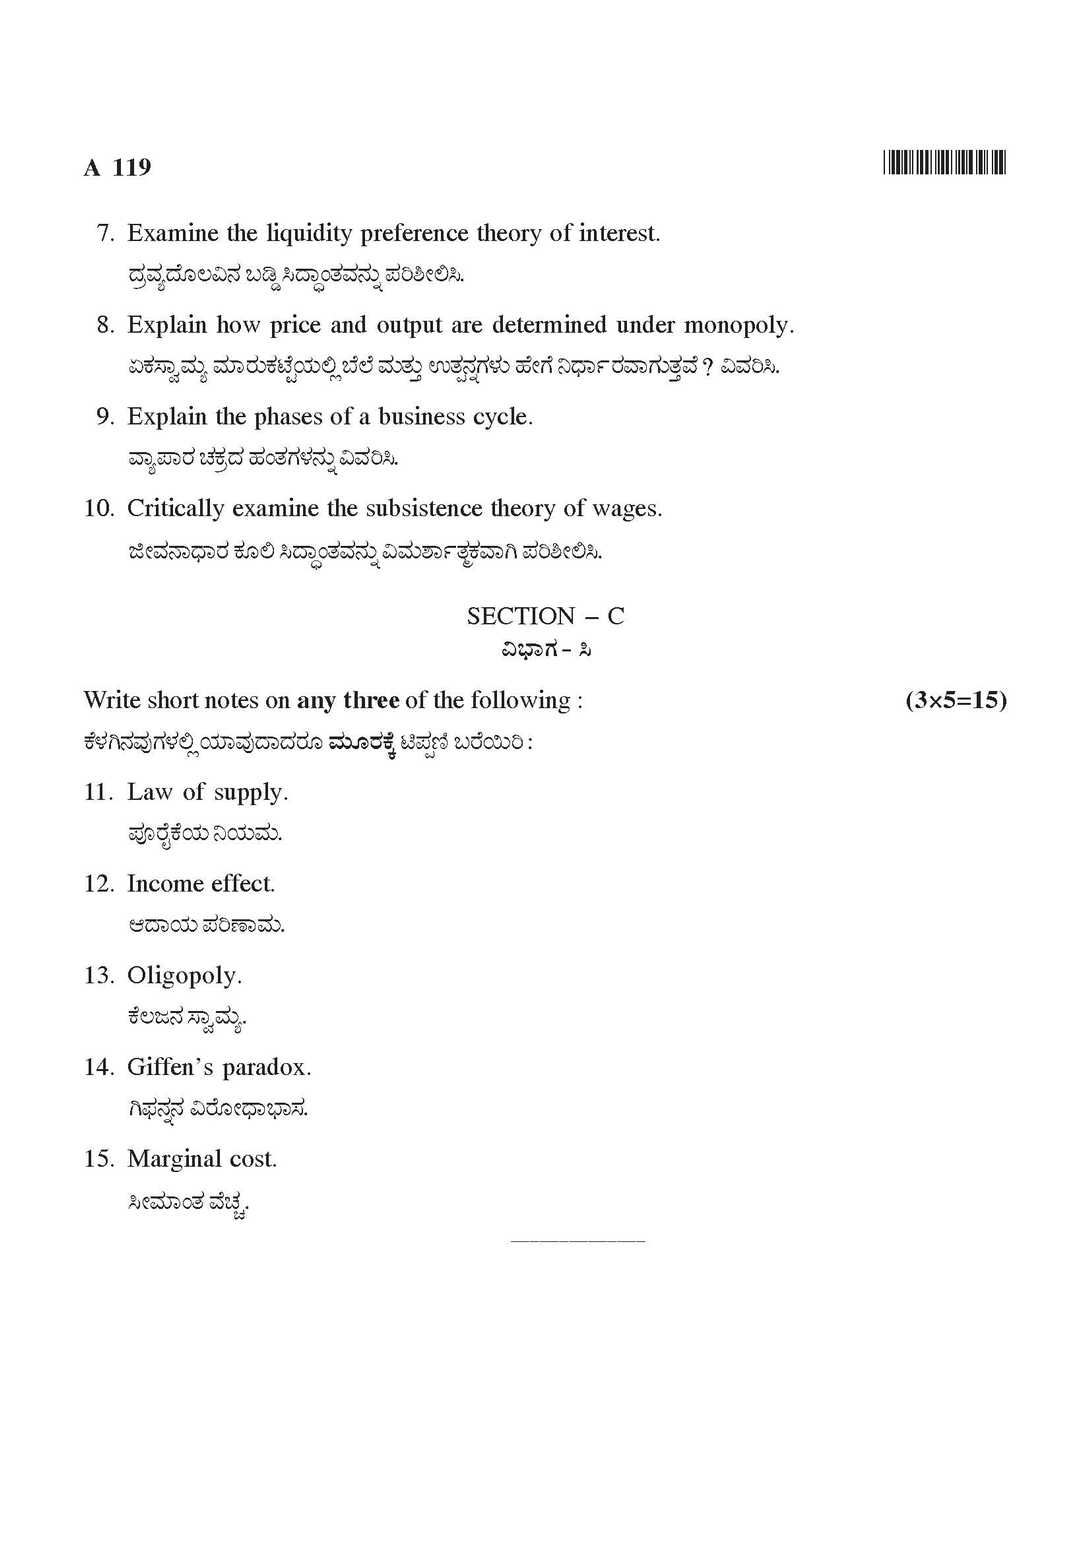 ba assignment question paper spring 2023